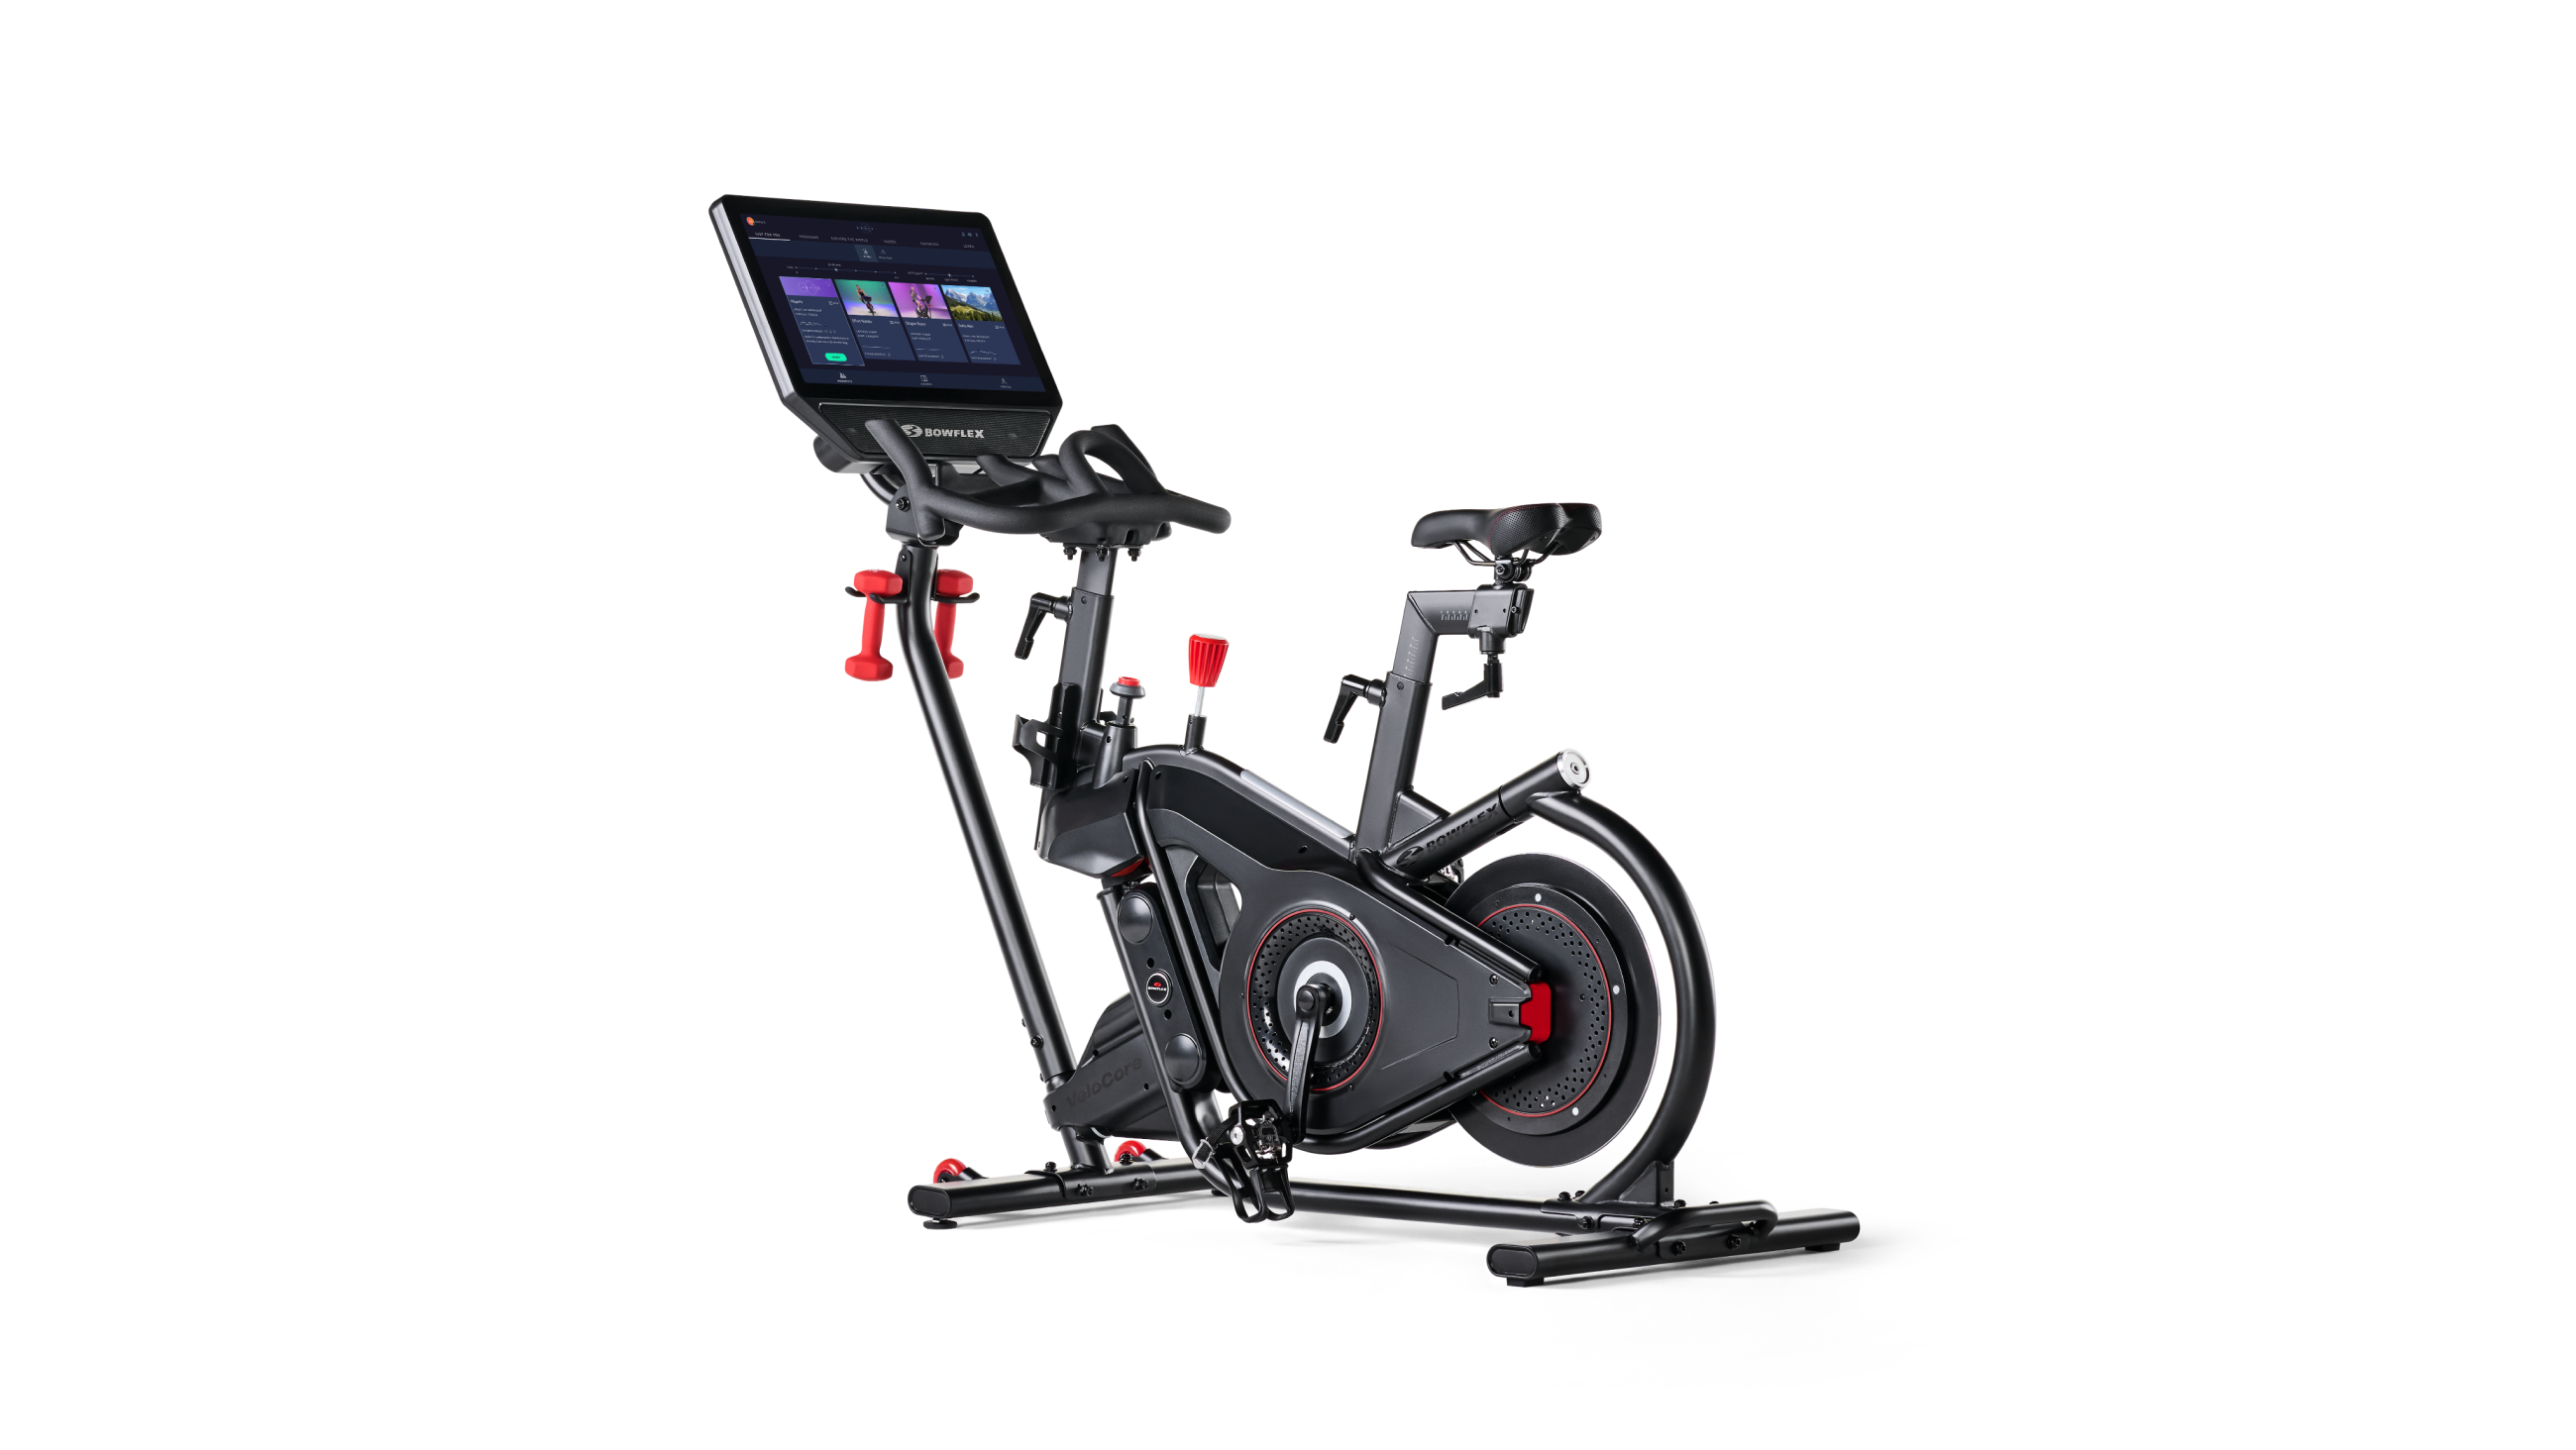 VeloCore Bike with 22-inch Console - default view